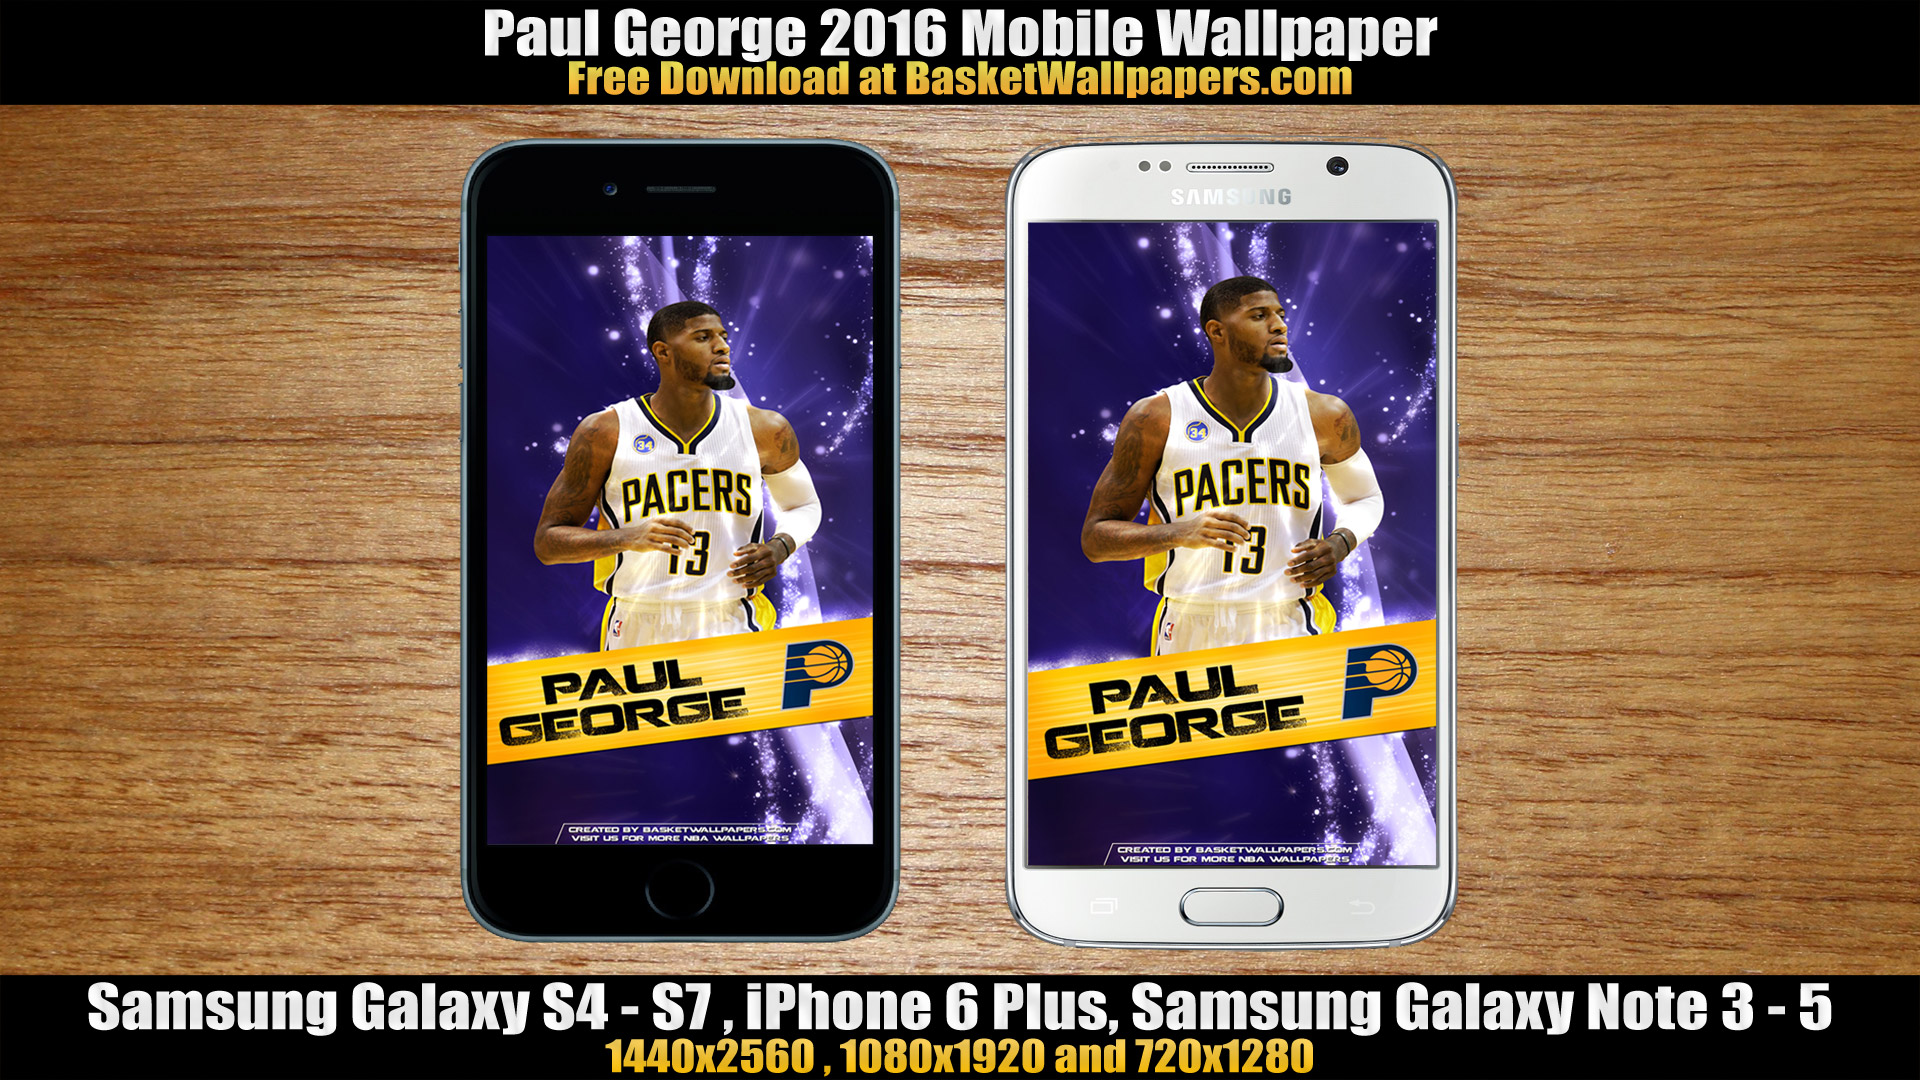 Paul George Indiana Pacers Mobile Wallpaper Basketball